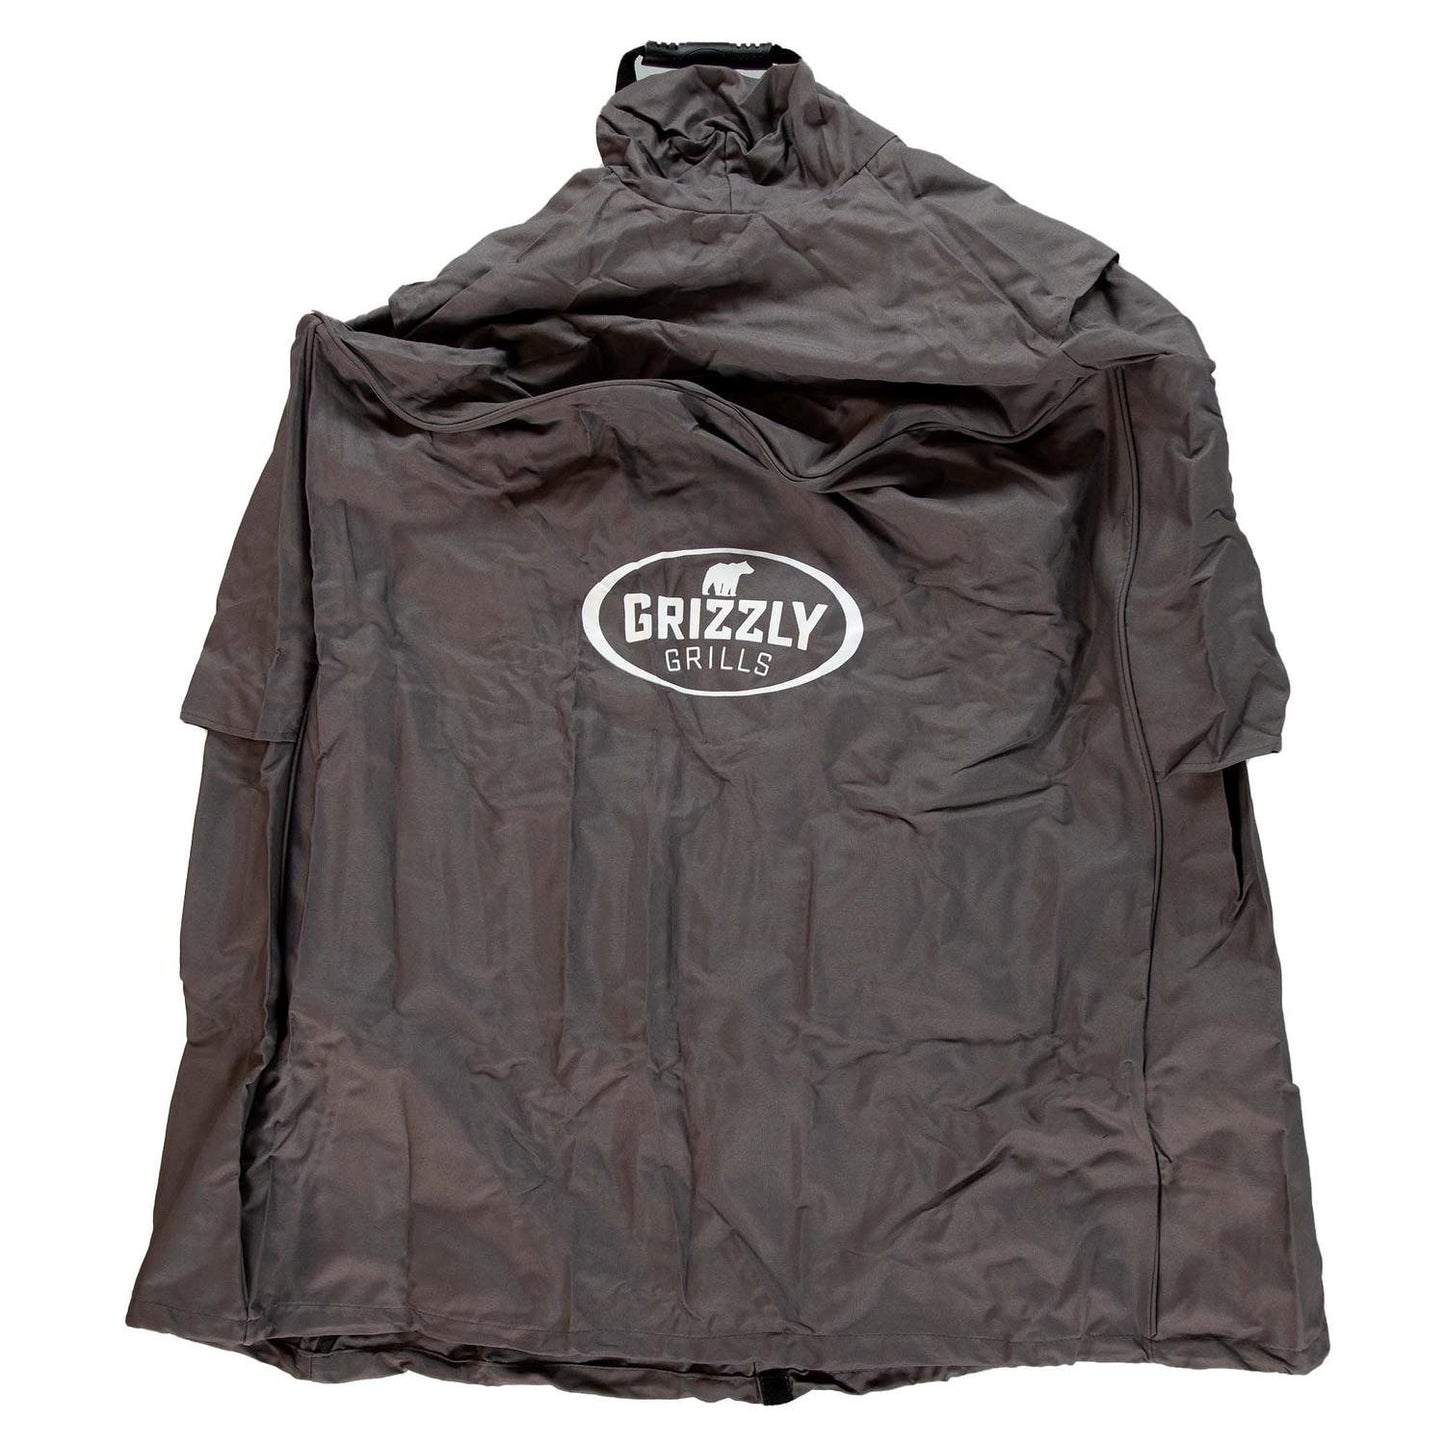 Grizzly Grills Raincover Medium